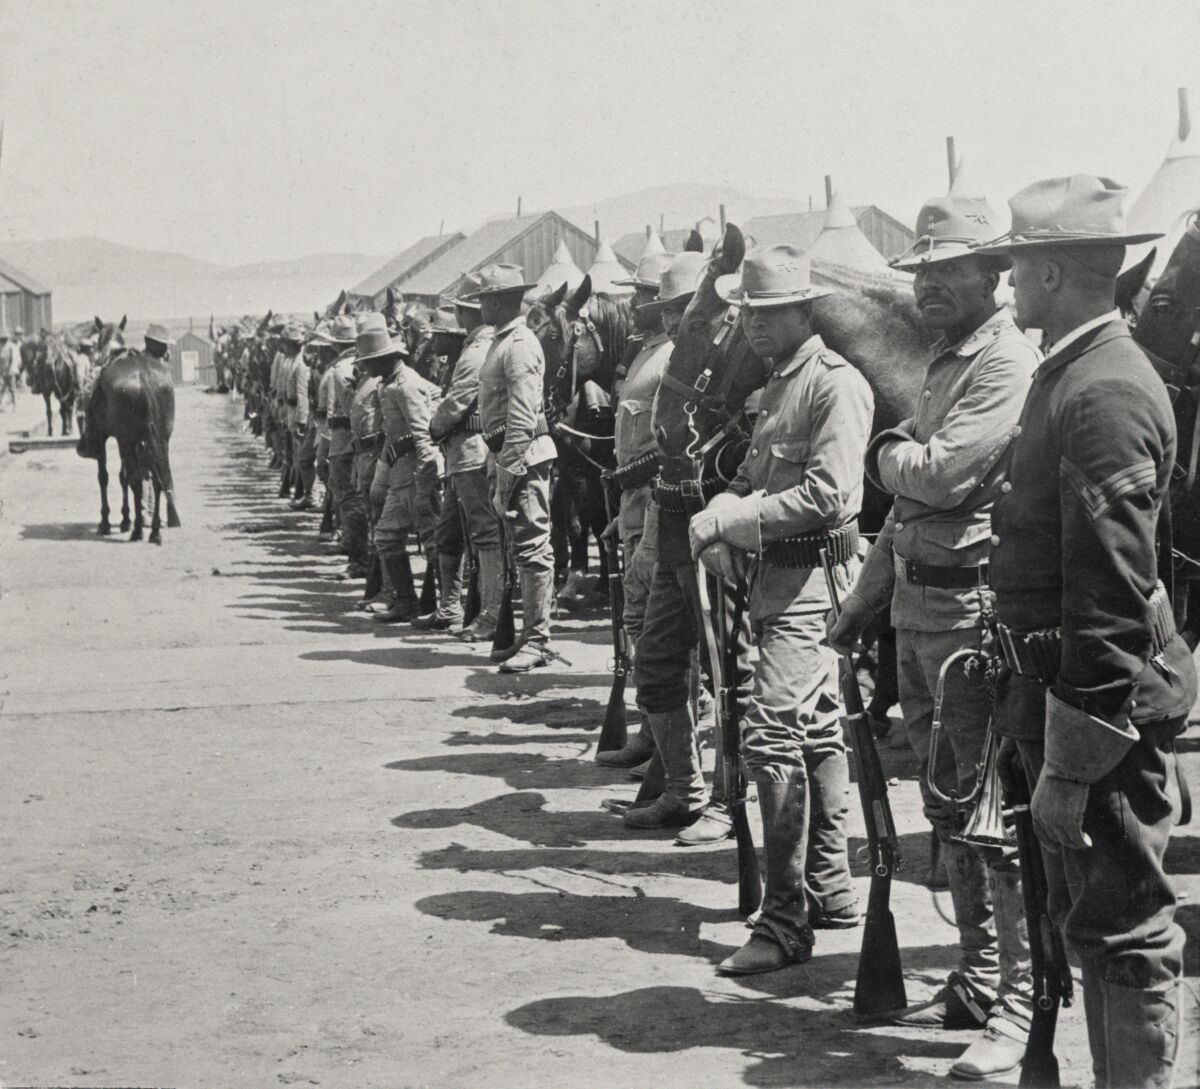 Men in uniforms that include hats and knee-high boots stand in a line holding rifles. Nearby, a soldier leads a horse.